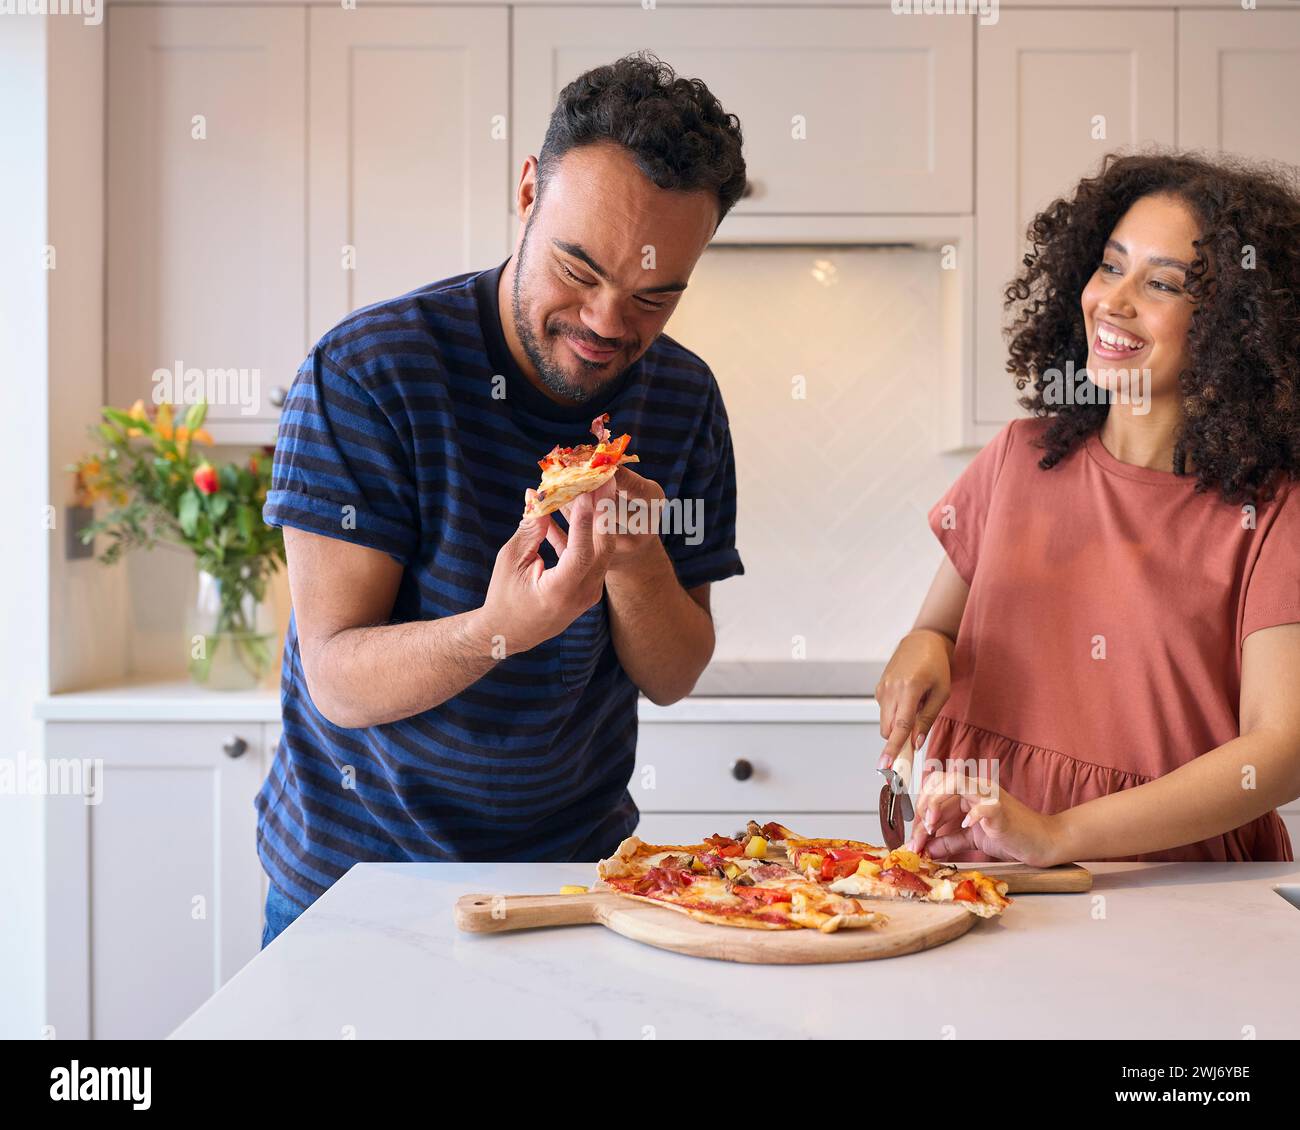 Couple At Home With Man With Down Syndrome And Woman Eating Homemade Pizza In Kitchen Together Stock Photo